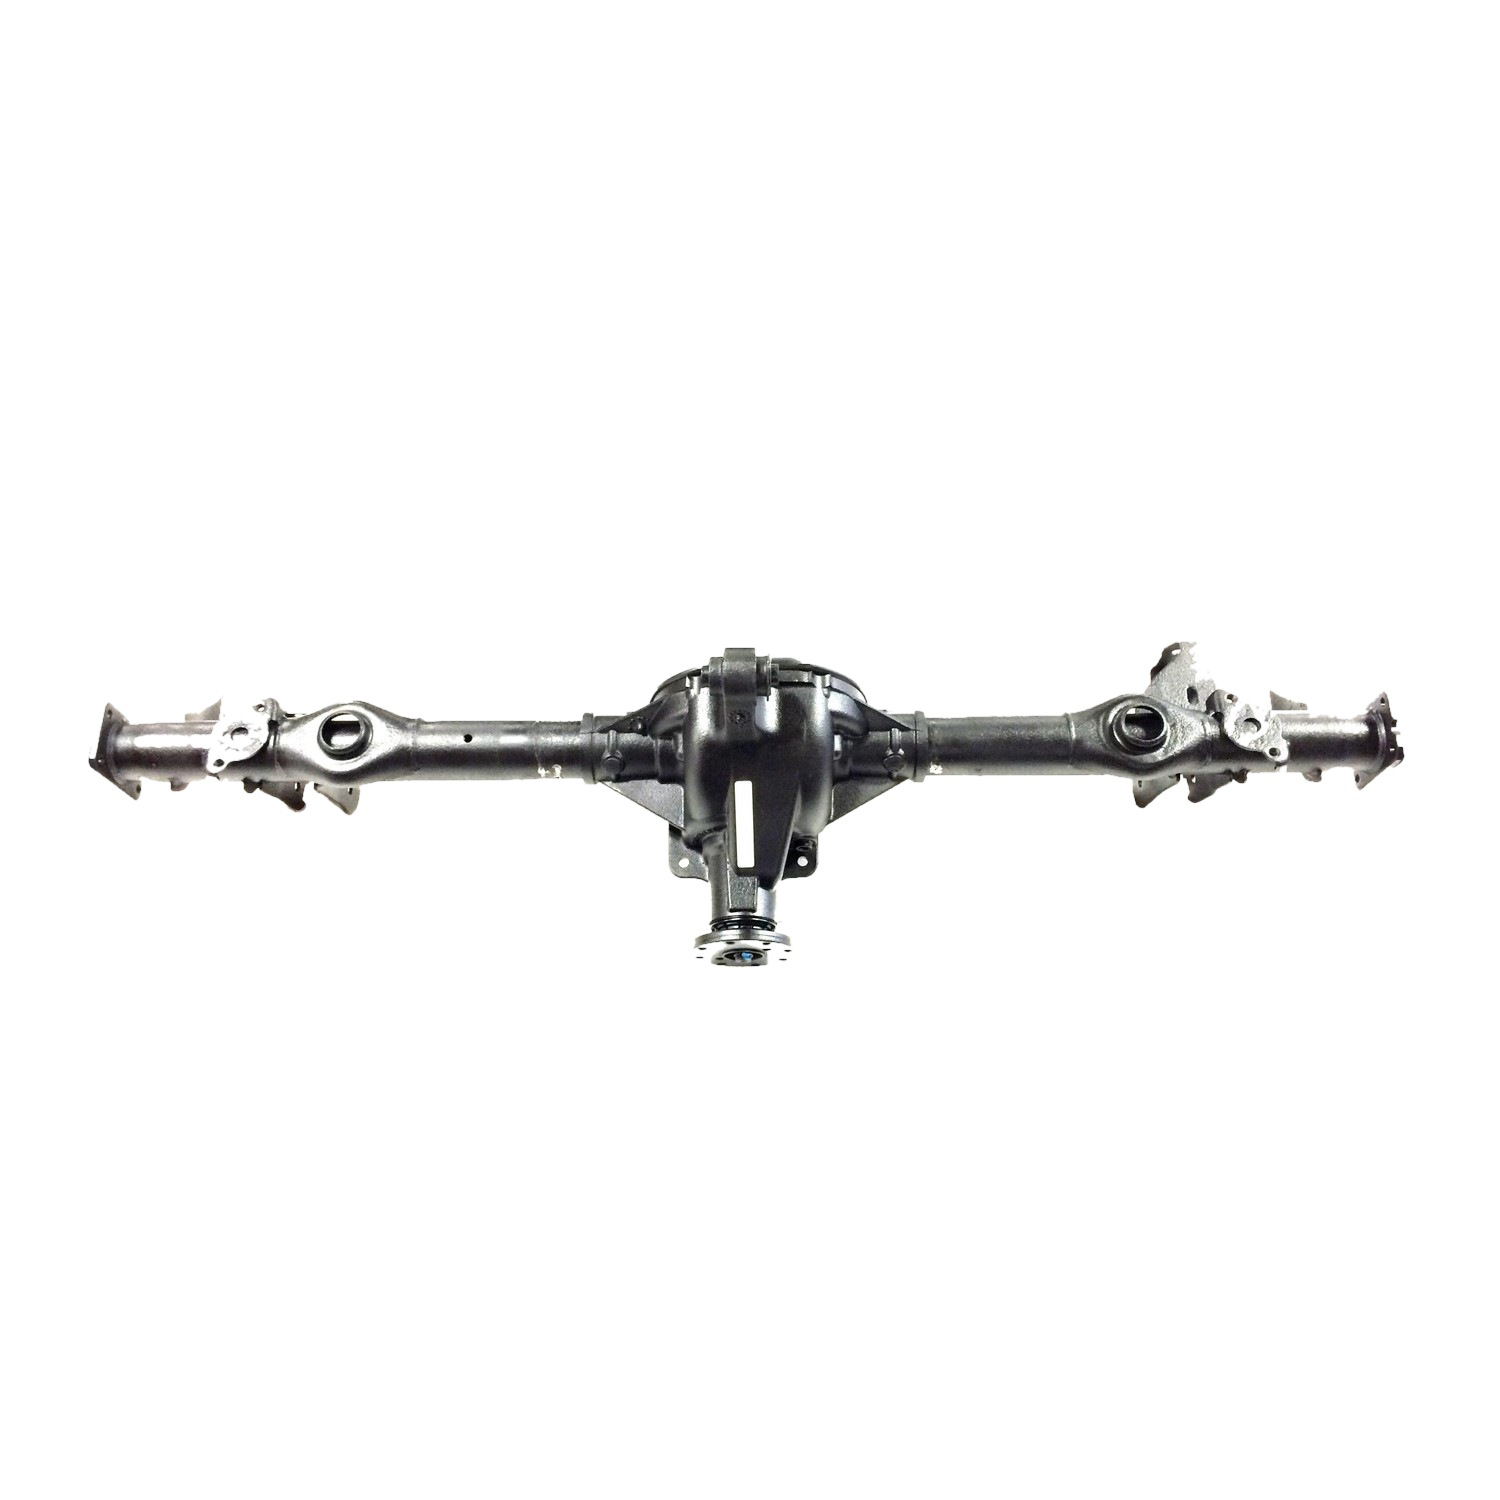 Reman Axle Assembly for Ford 7.5" 1994-98 Ford Mustang w/o ABS, 2.73 Ratio, Open